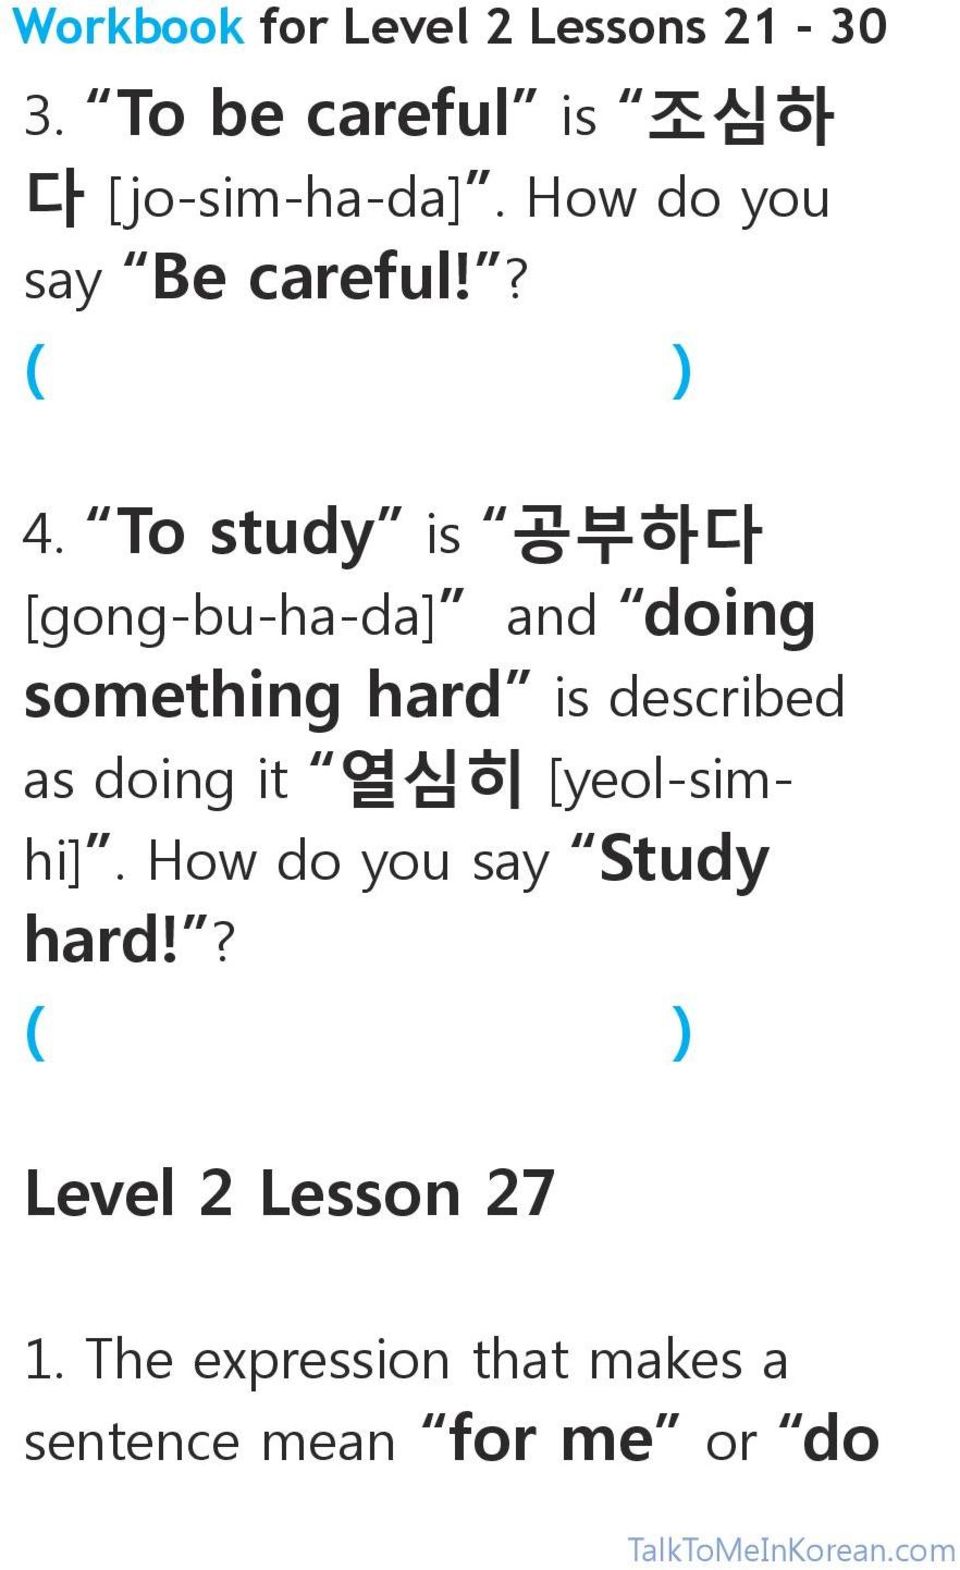 described as doing it 열심히 [yeol-simhi]. How do you say Study hard!